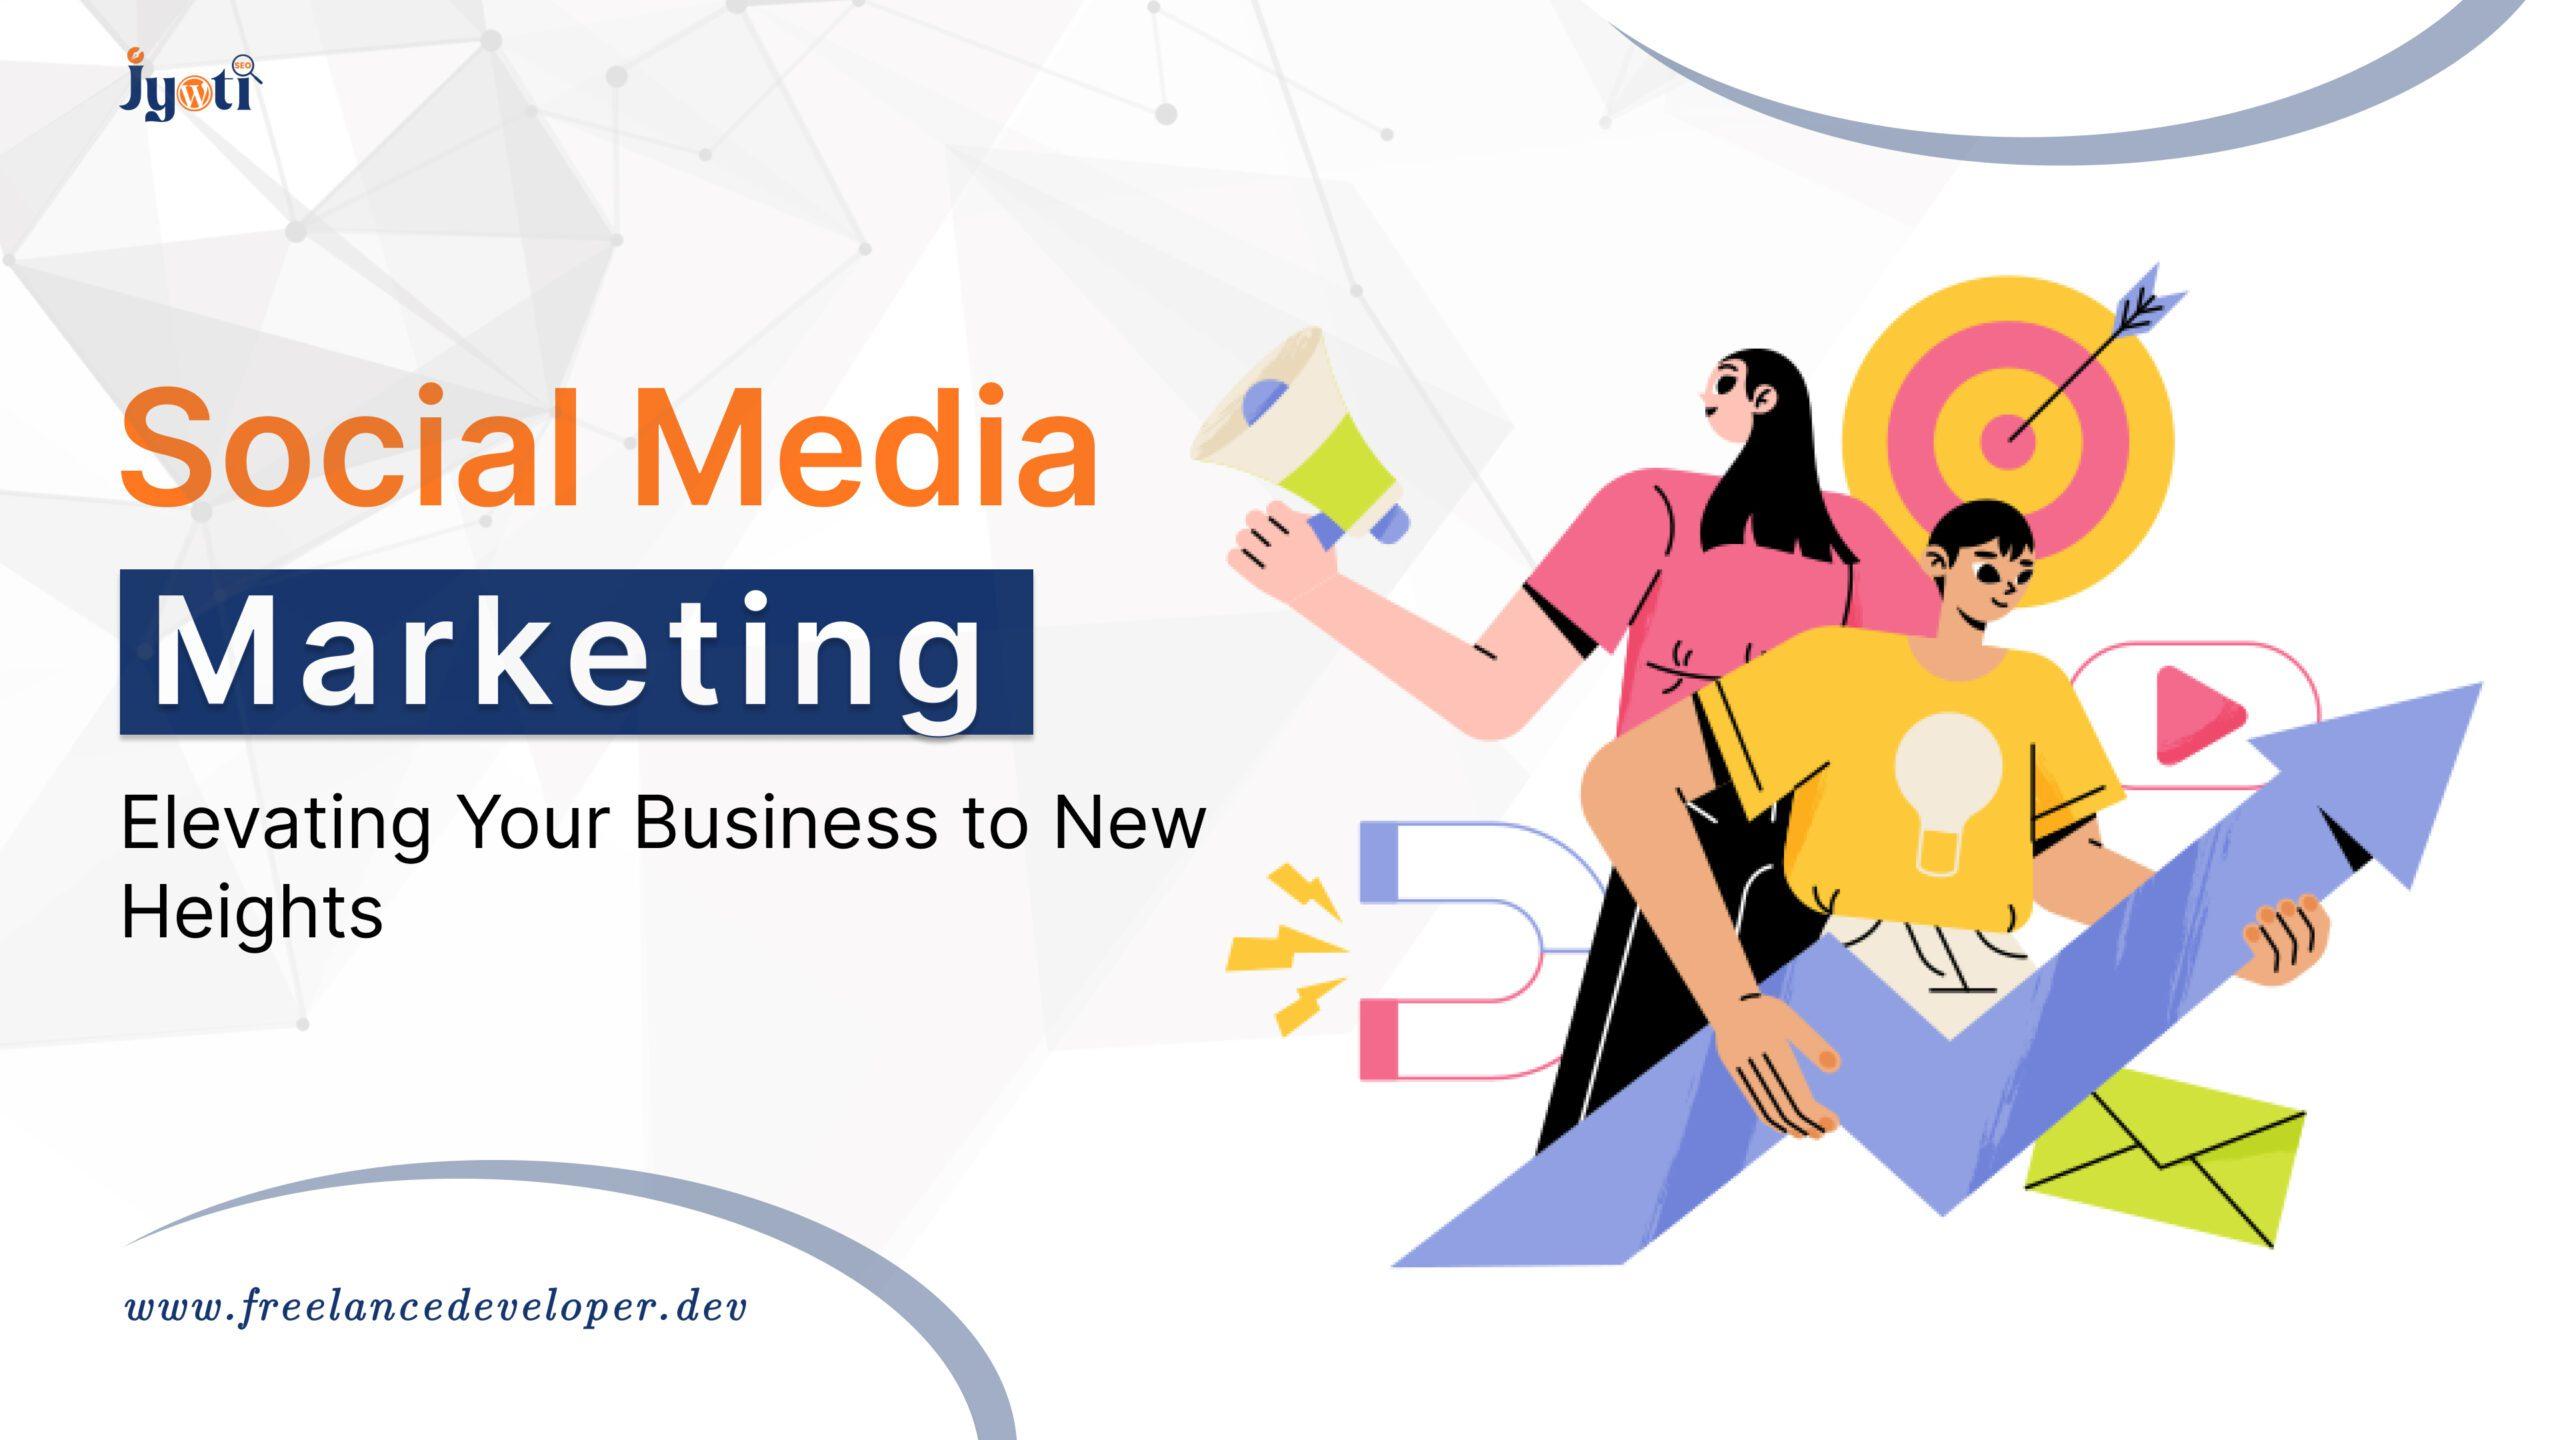 Social Media Marketing: Elevating Your Business to New Heights